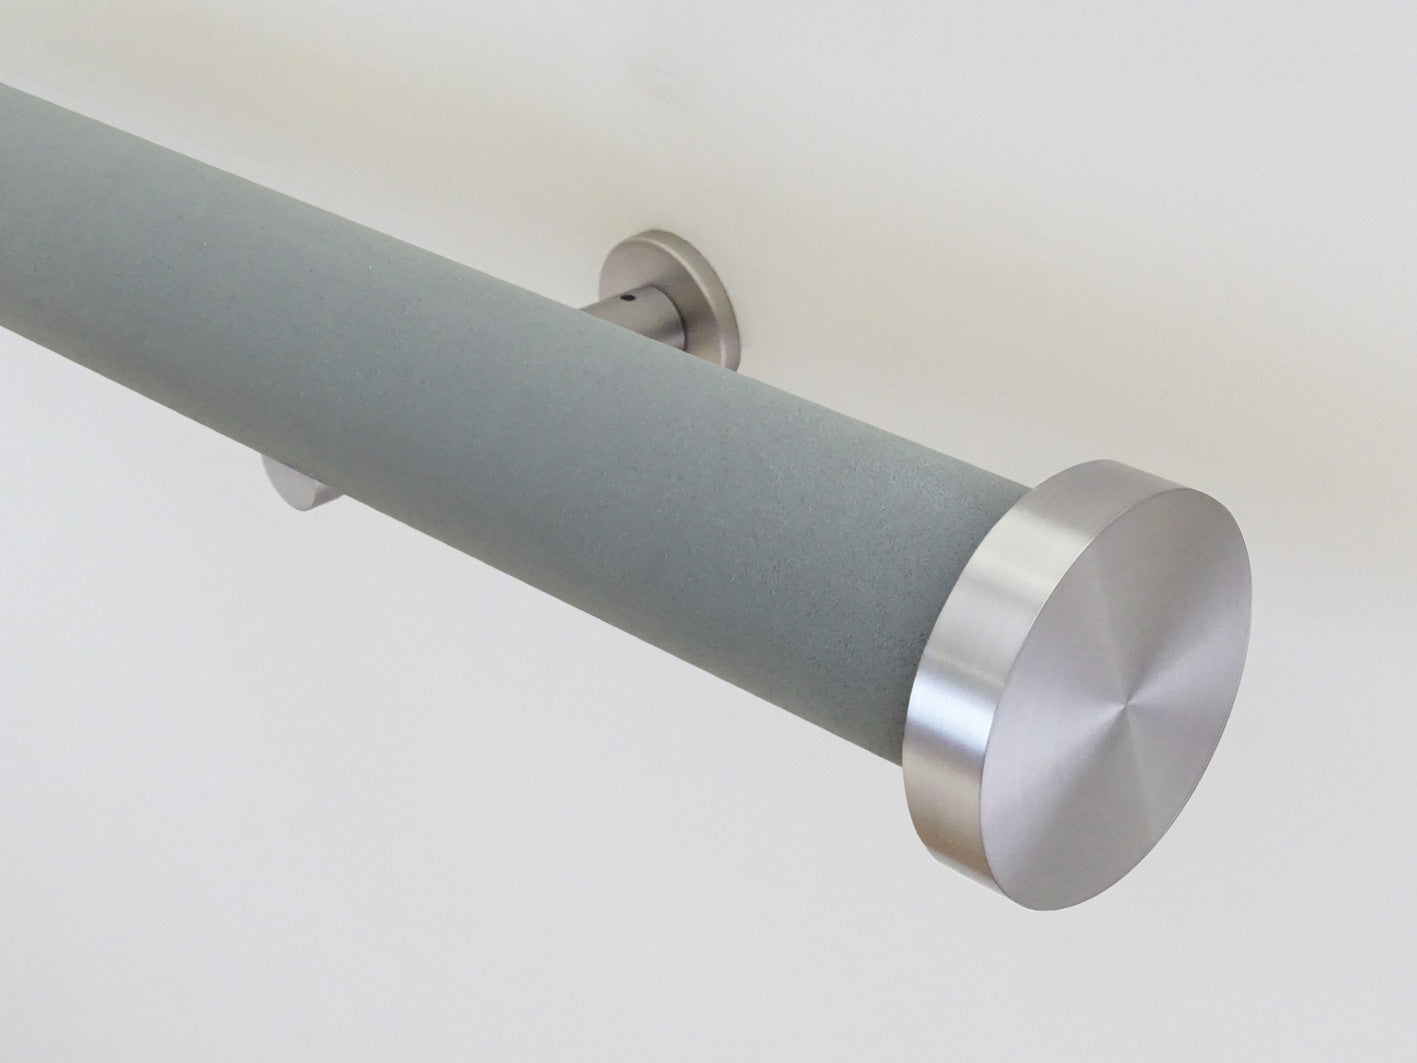 Faux Suede "Slate" 50mm tracked curtain pole by Walcot House